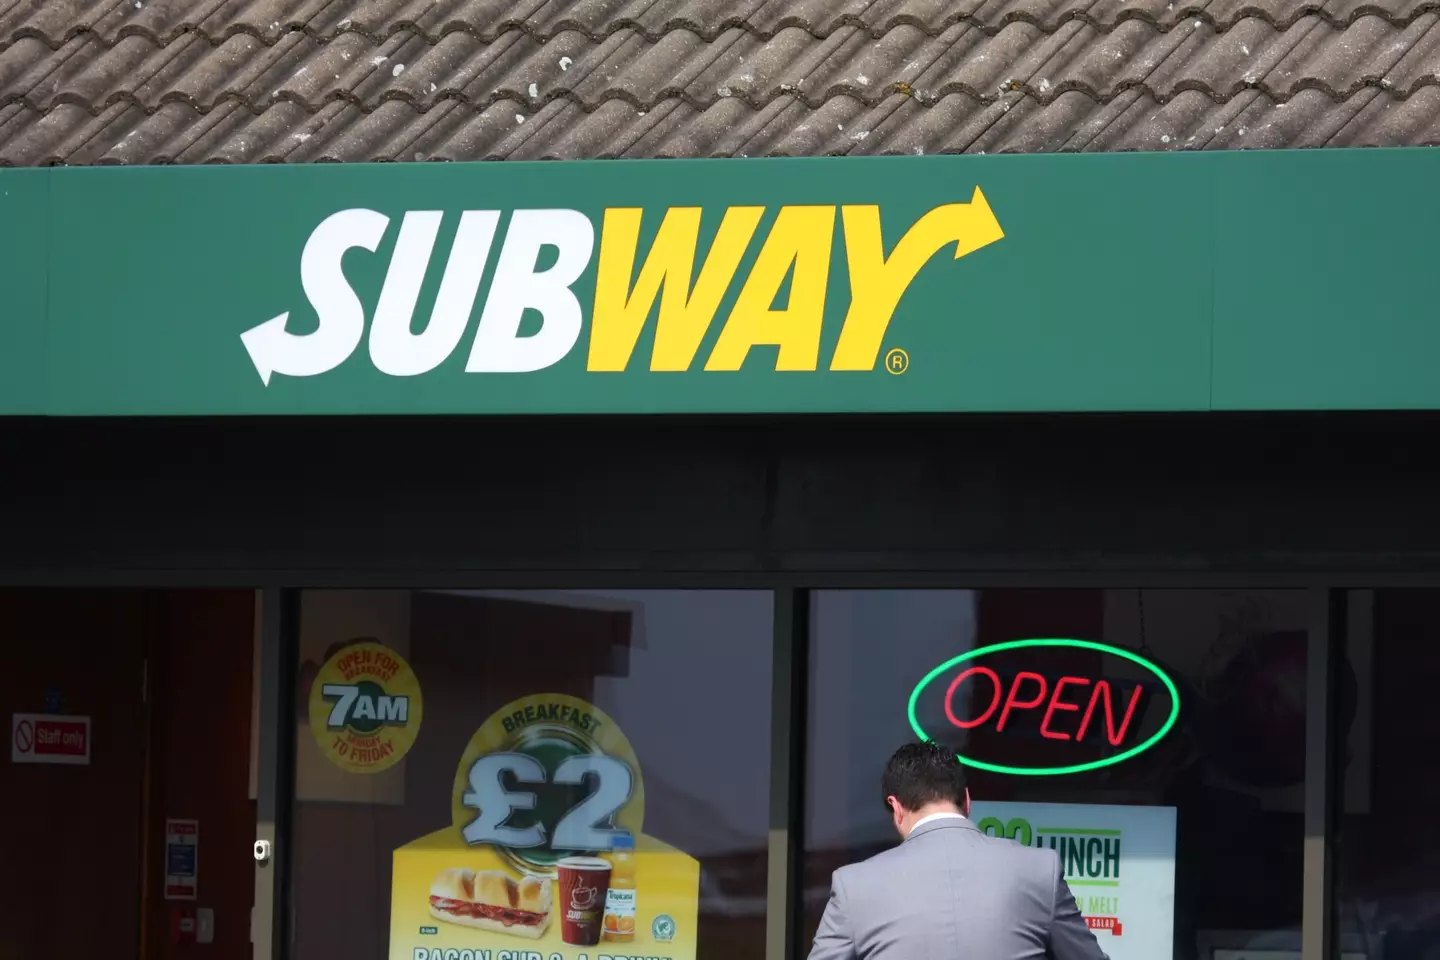 Subway invites you to eat fresh, unless there's a knife in your food in which case please remove it before eating.